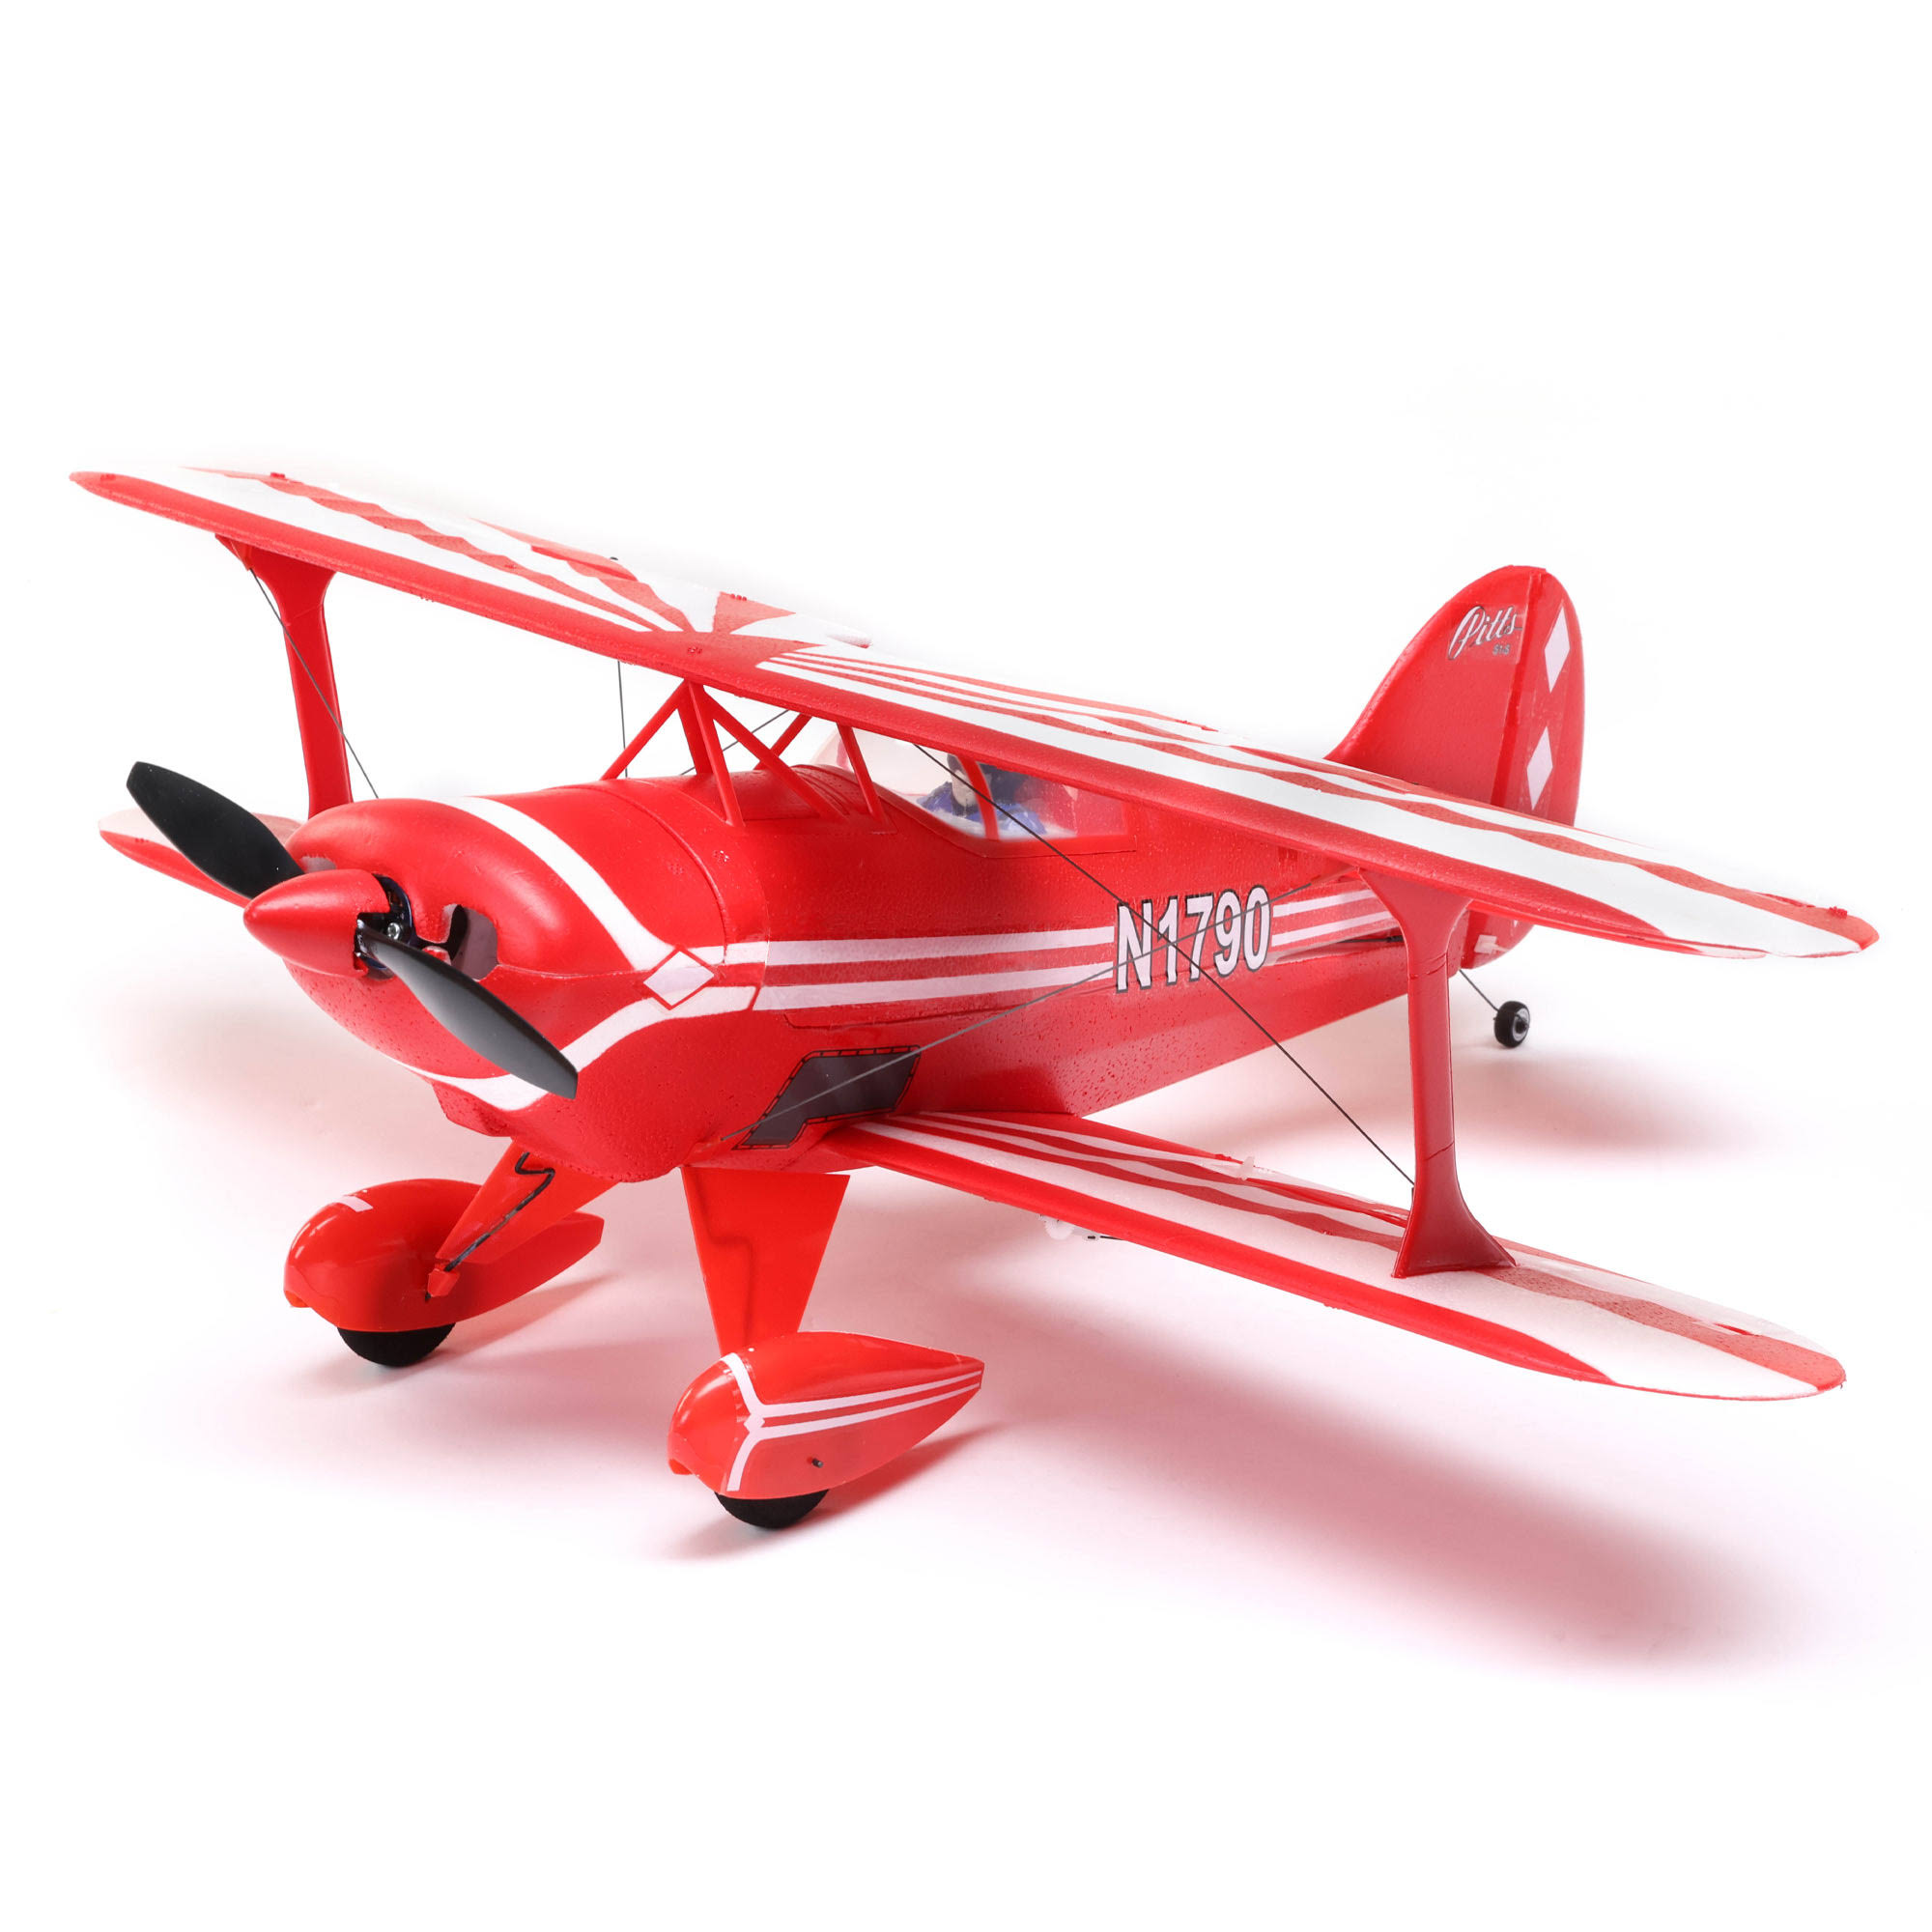 E-flite UMX Pitts S-1S BNF Basic with AS3X and Safe Select EFLU15250